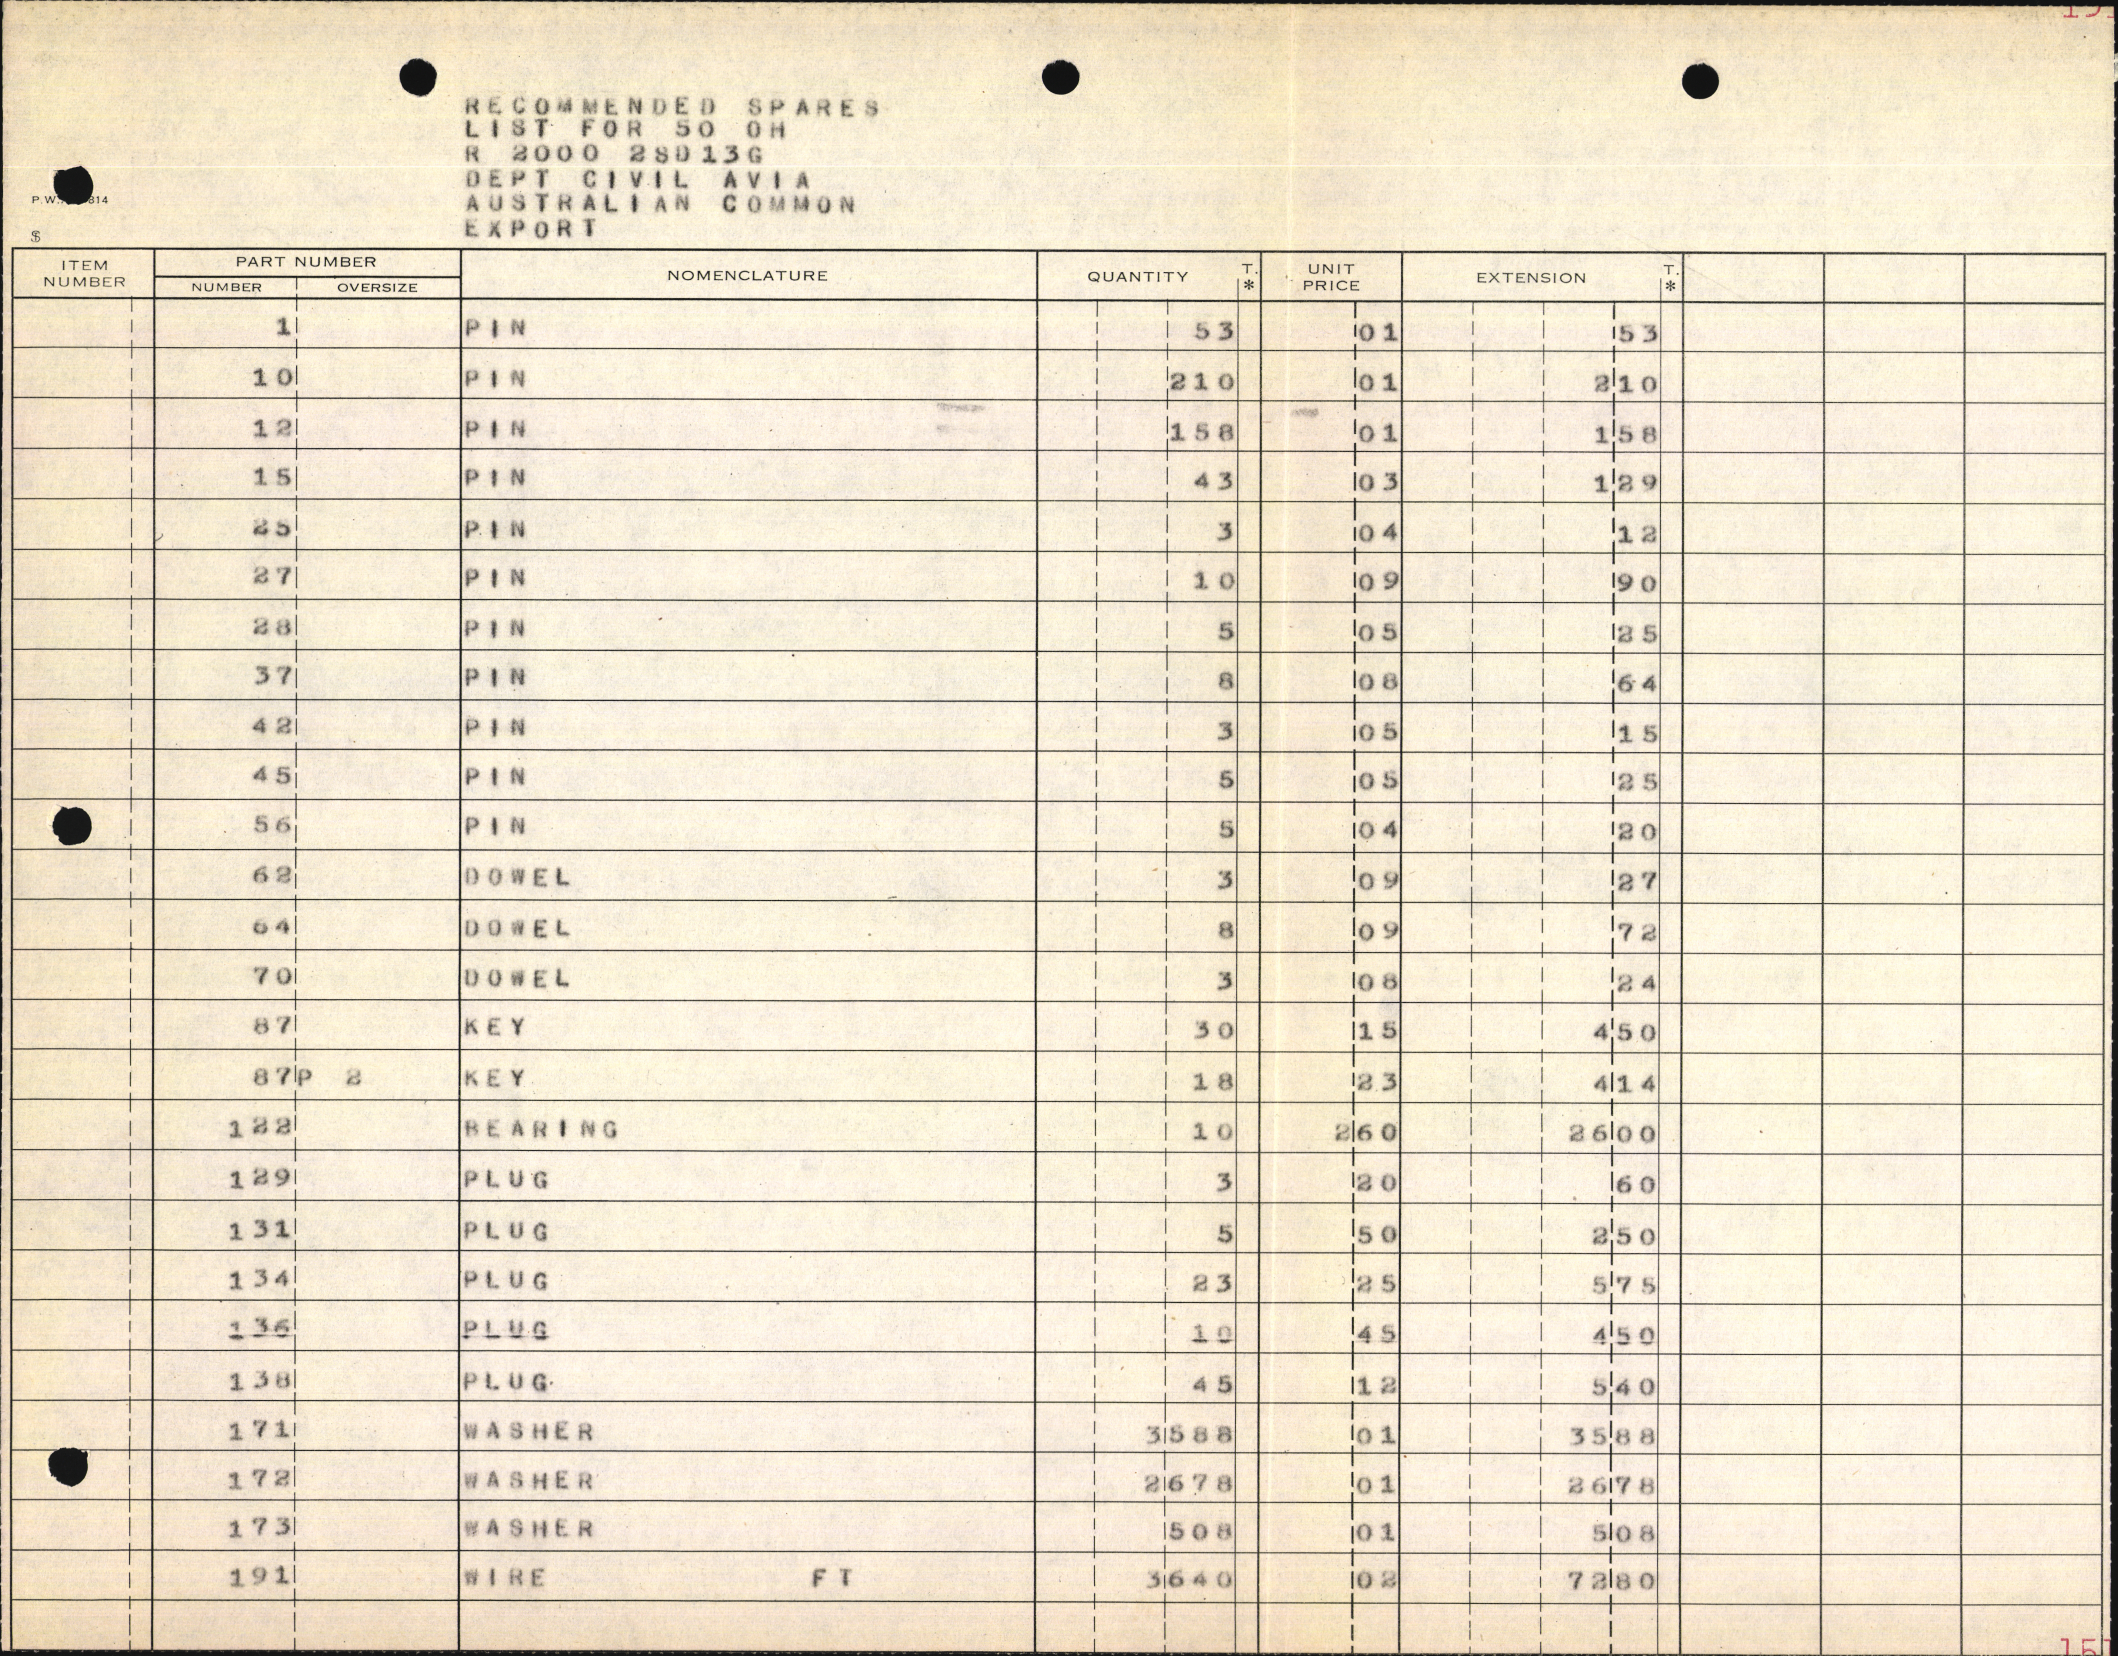 Sample page 3 from AirCorps Library document: Recommended Spares List for 50 Overhauls R-2000-2SD13G Engines